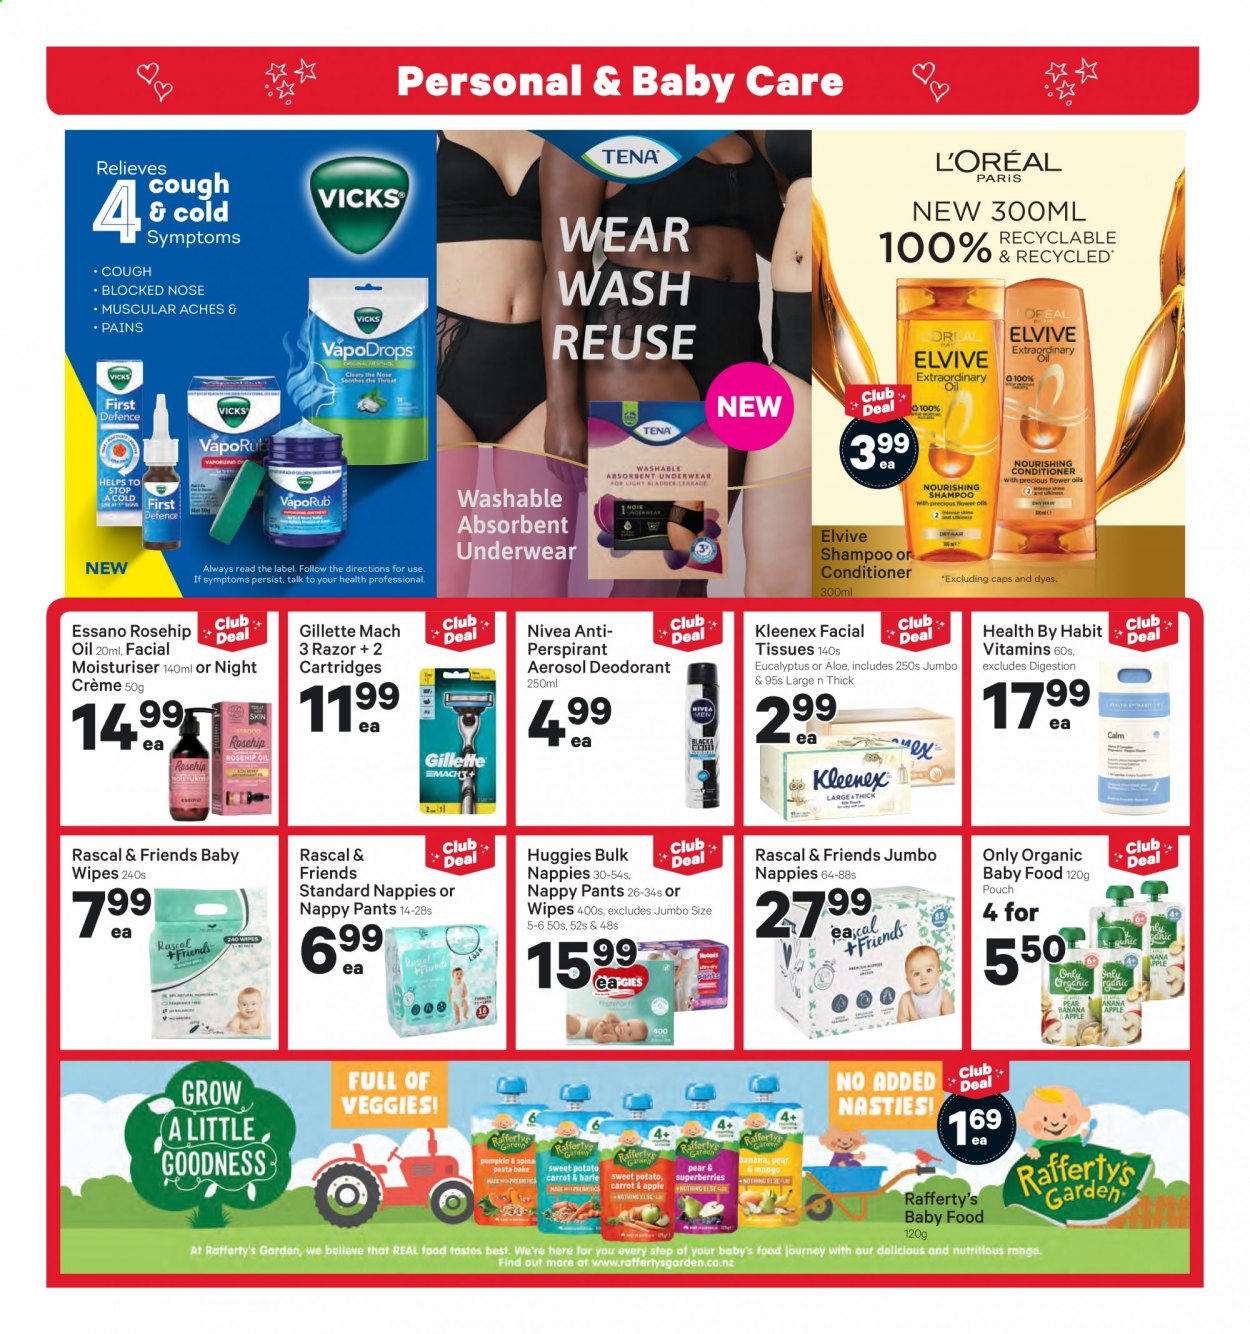 thumbnail - New World mailer - 26.07.2021 - 01.08.2021 - Sales products - oil, organic baby food, wipes, Huggies, pants, baby wipes, nappies, Nivea, Kleenex, tissues, shampoo, facial tissues, rosehip oil, conditioner, Essano, anti-perspirant, deodorant, Gillette, razor. Page 16.